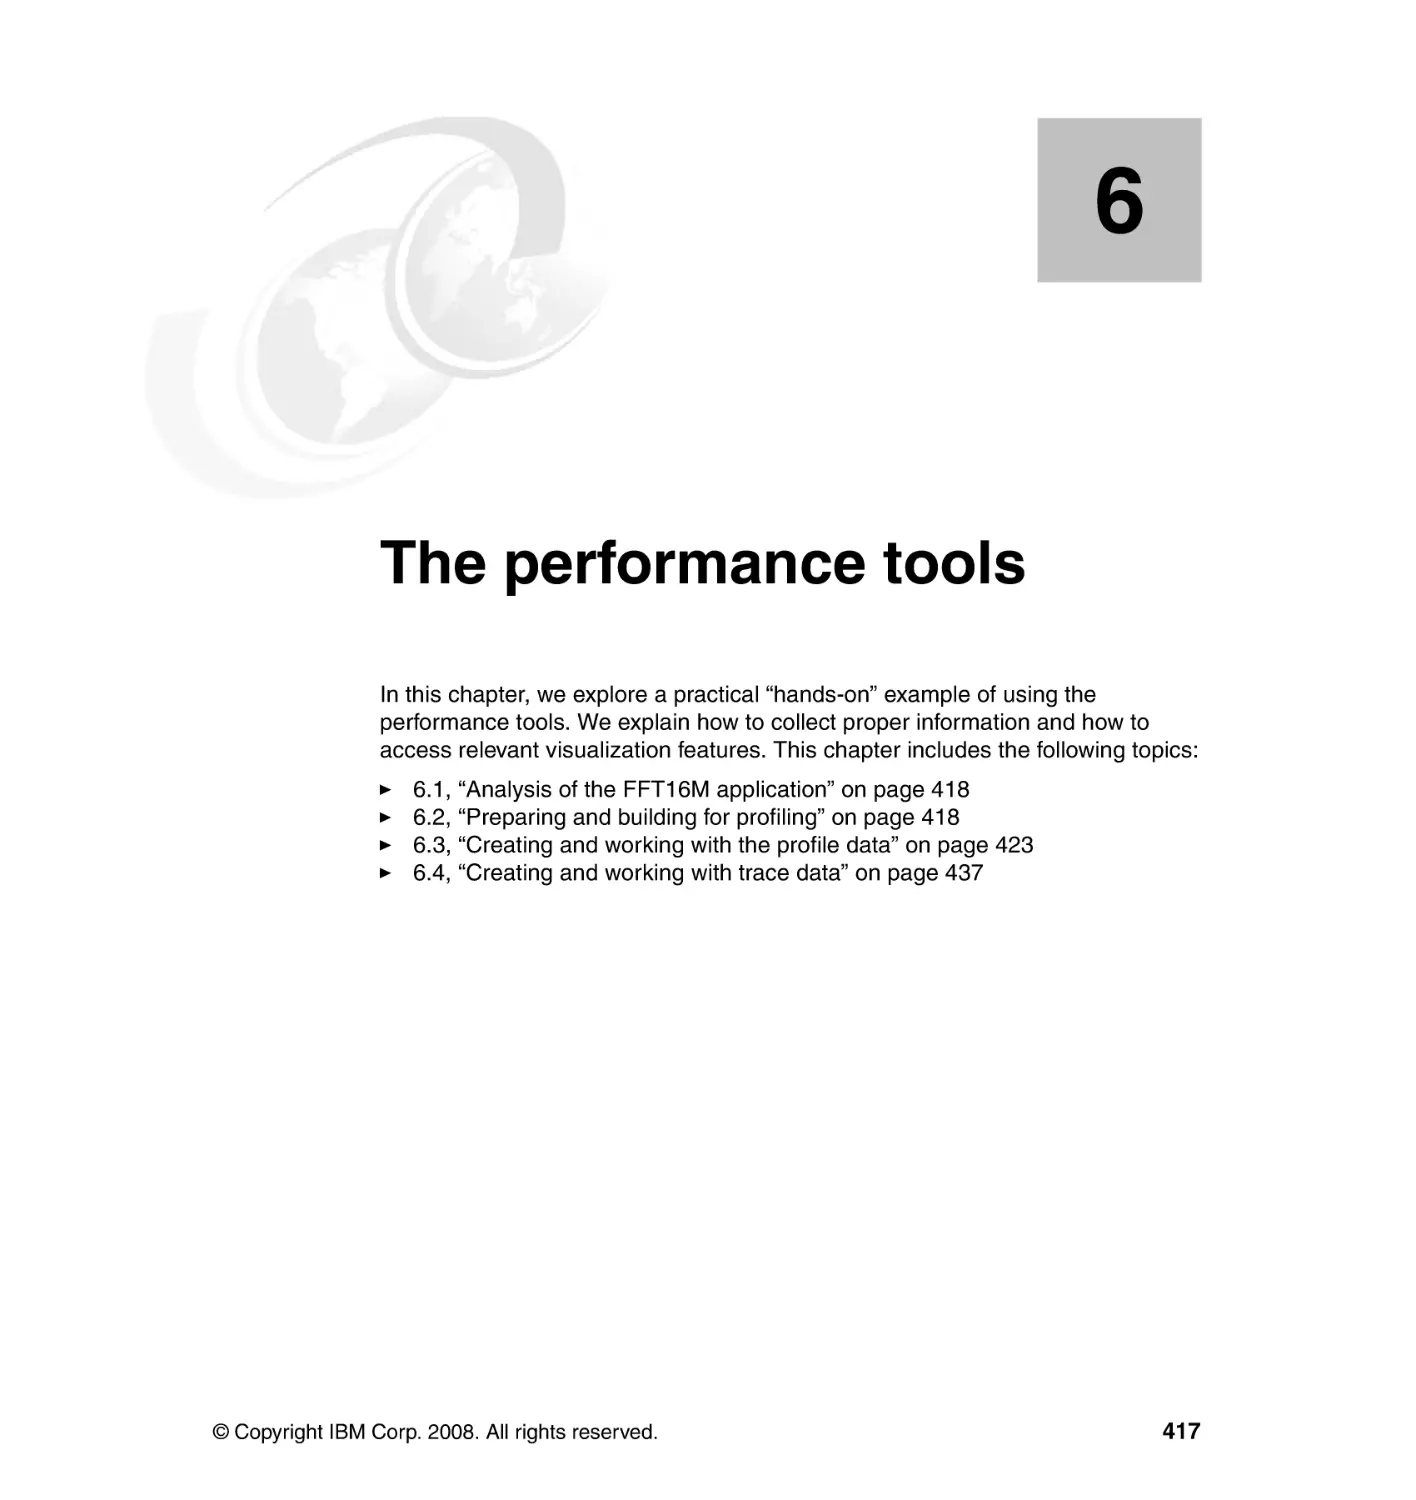 Chapter 6. The performance tools